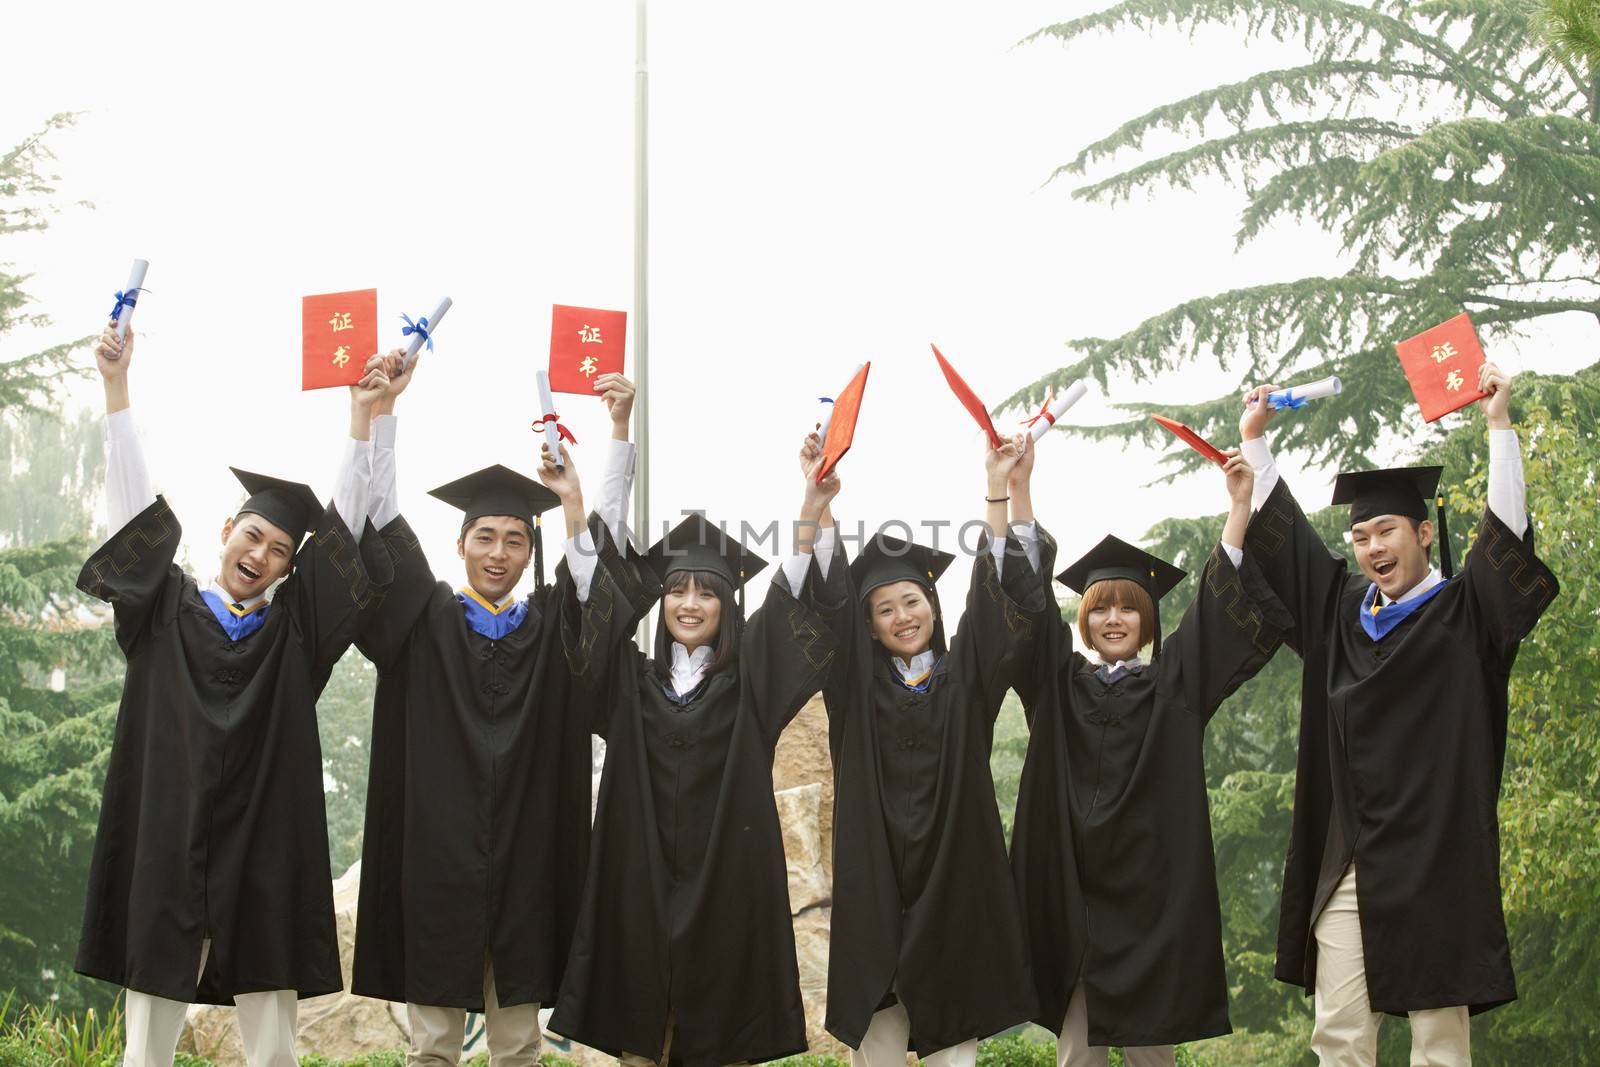 Young Group of University Graduates With Diplomas in Hand